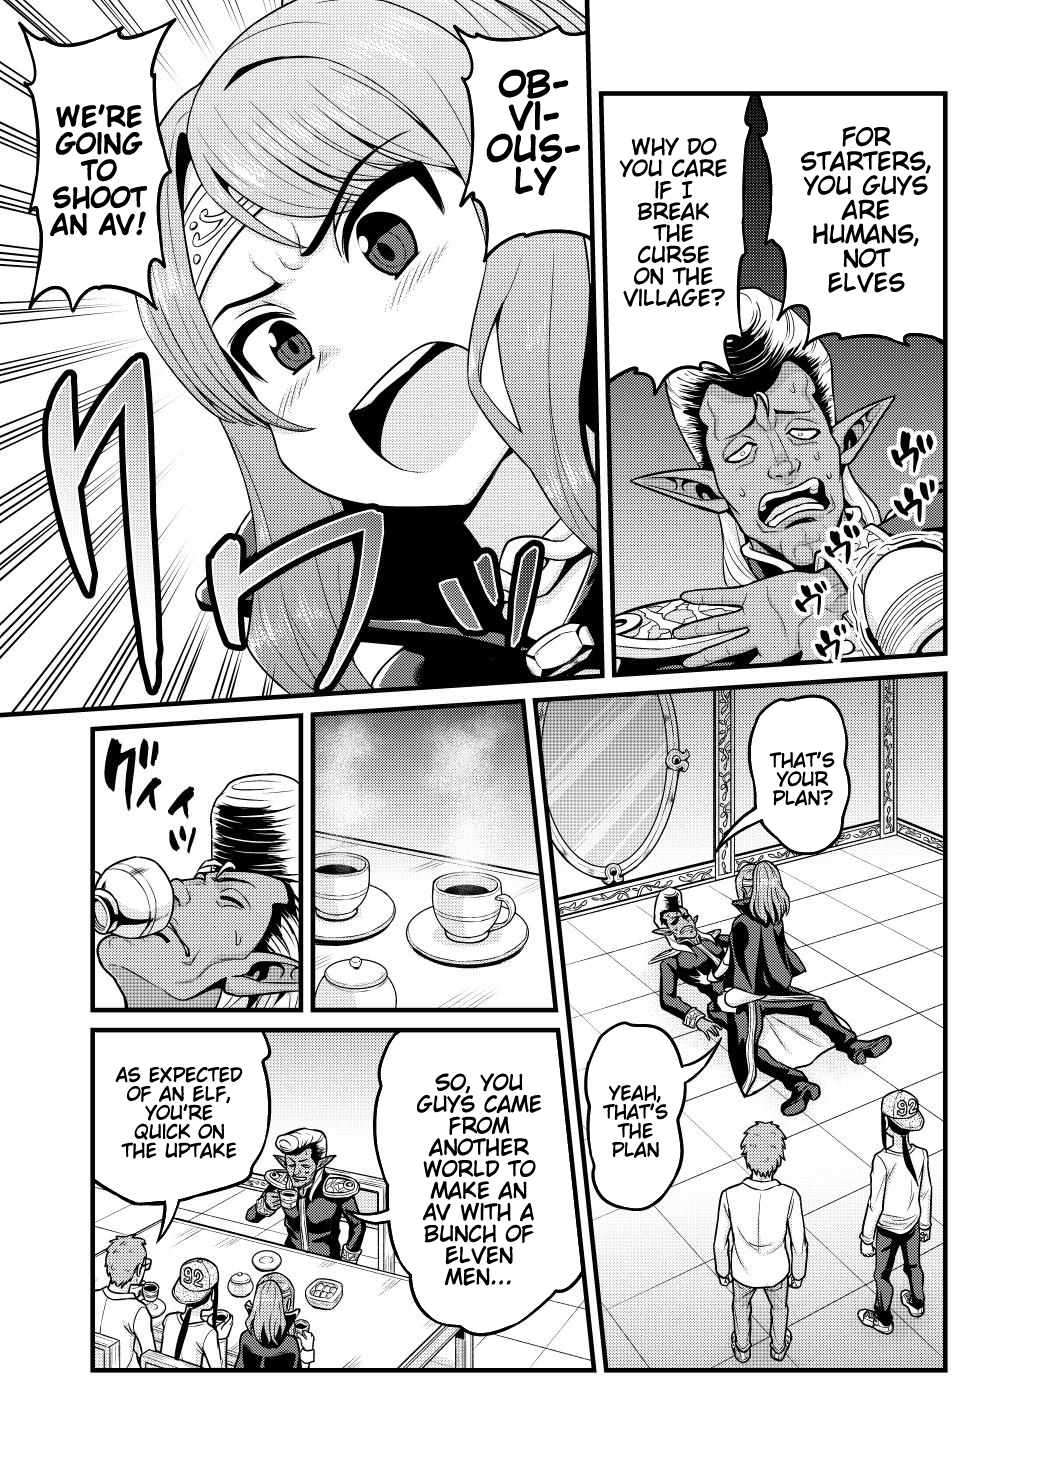 Filming Adult Videos in Another World - Chapter 3 Page 24